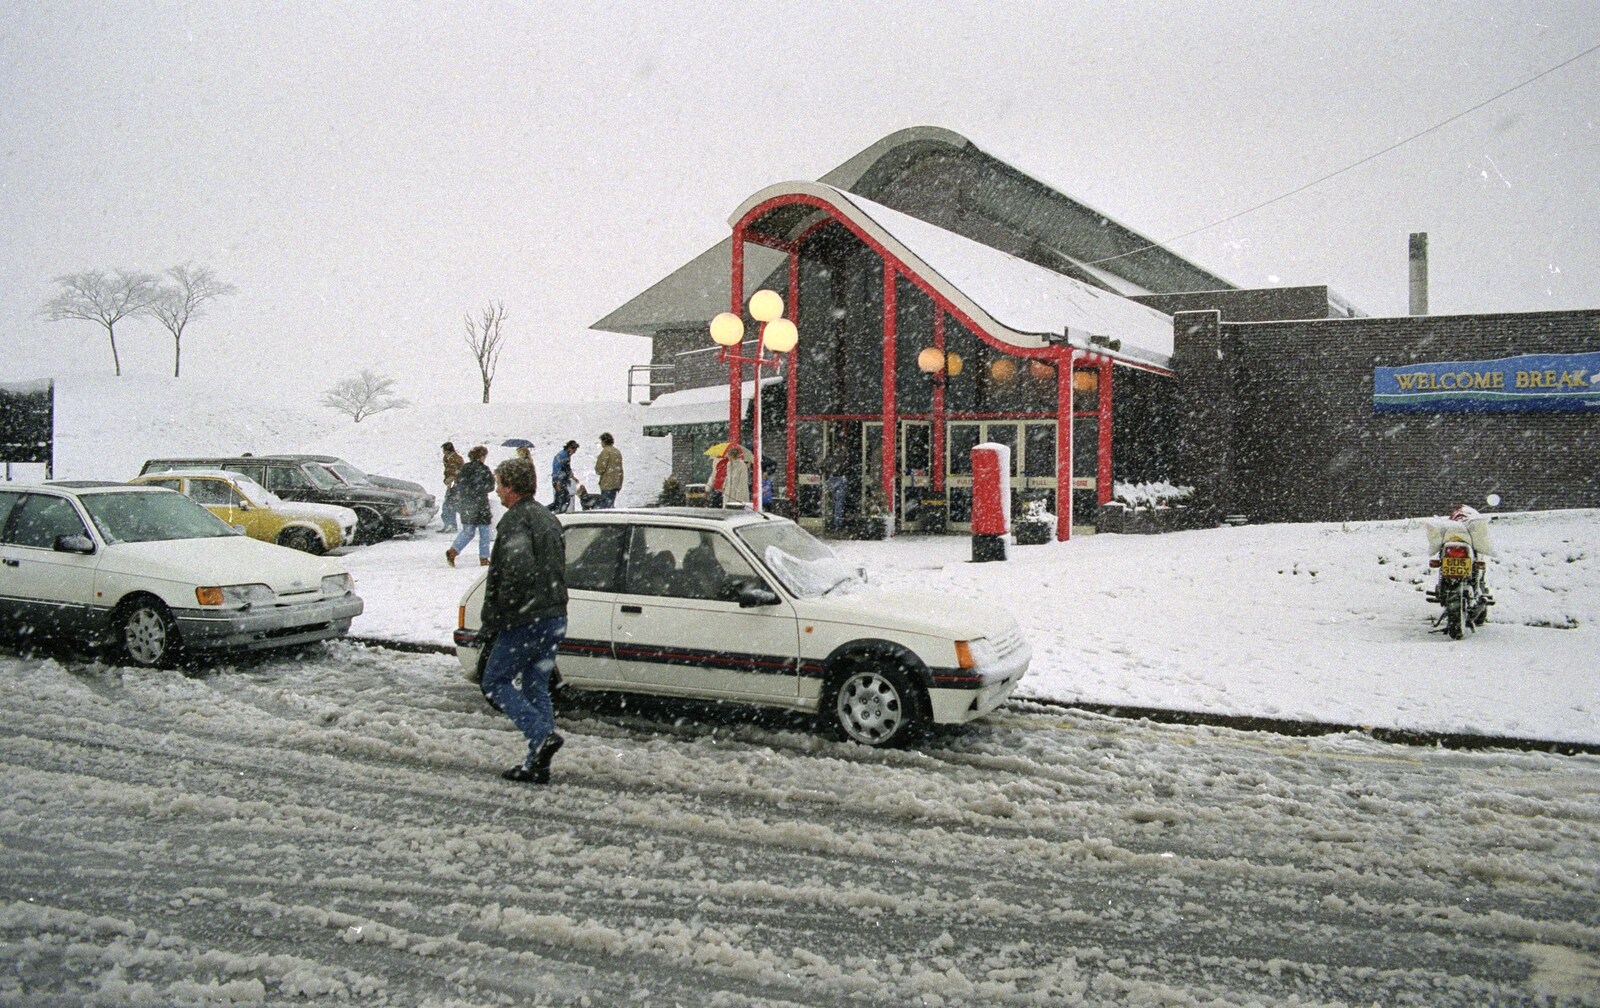 A Trip to Plymouth and Bristol, Avon and Devon - 18th February 1990: Snow whirls around Membury Services on the M4